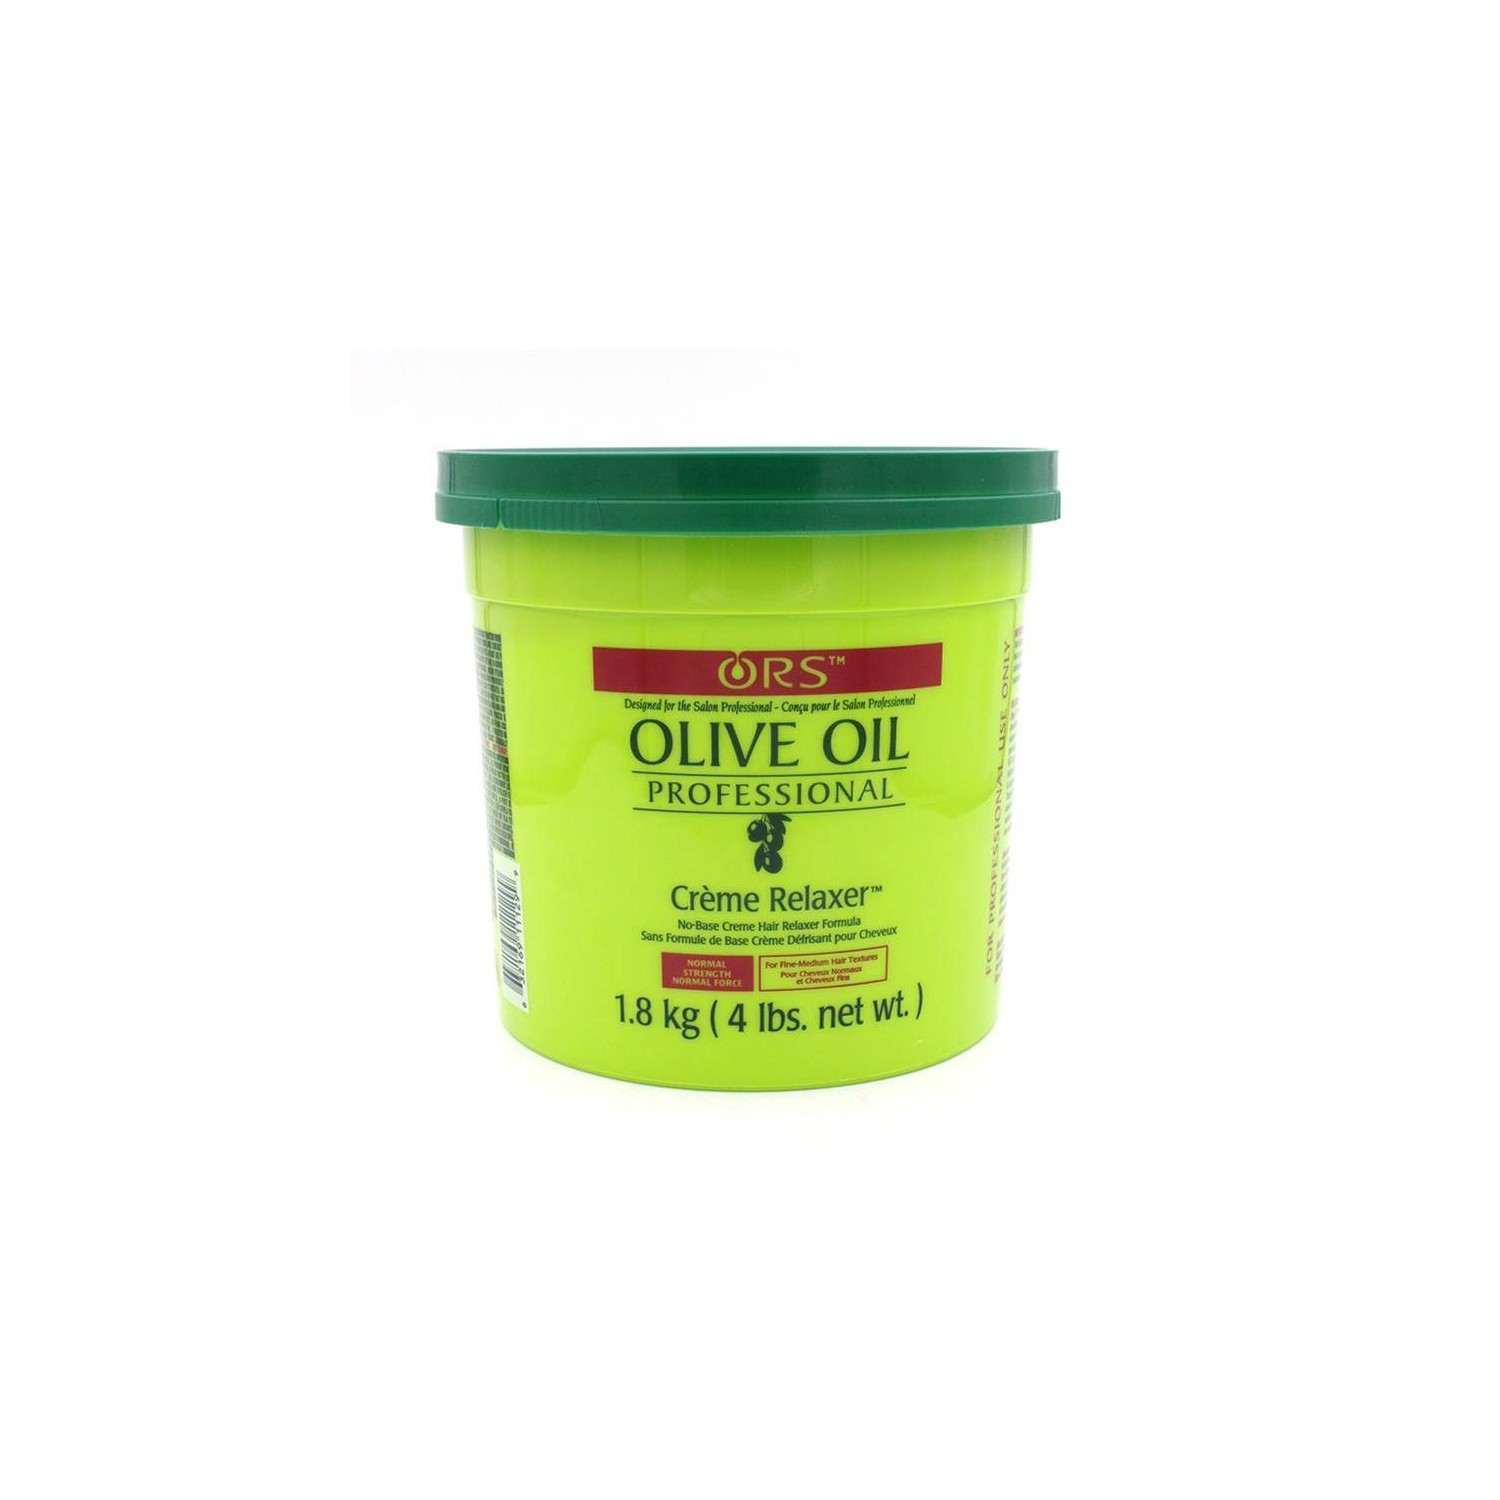 Ors Olive Oil Creme Relaxer Normal 1,8 kg